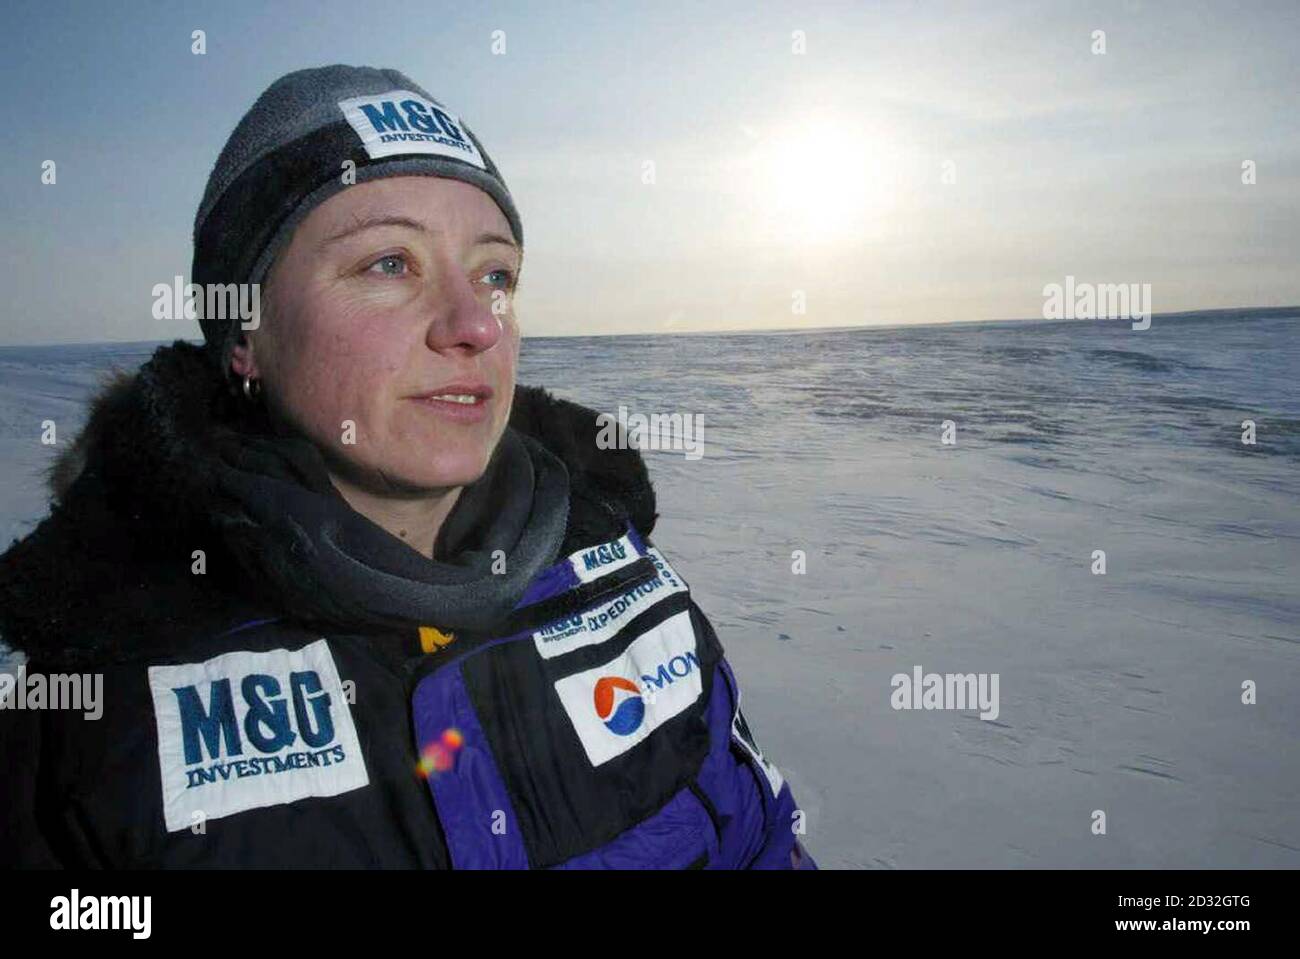 Caroline Hamilton (35) and Ann Daniels (37) reached the North Pole becoming the first female expedition to walk to both Poles. Picture is of Ann Daniels.   * 18/10/02: Ms Daniels was receiving an honorary doctor of law degree at Exeter University.  Stock Photo